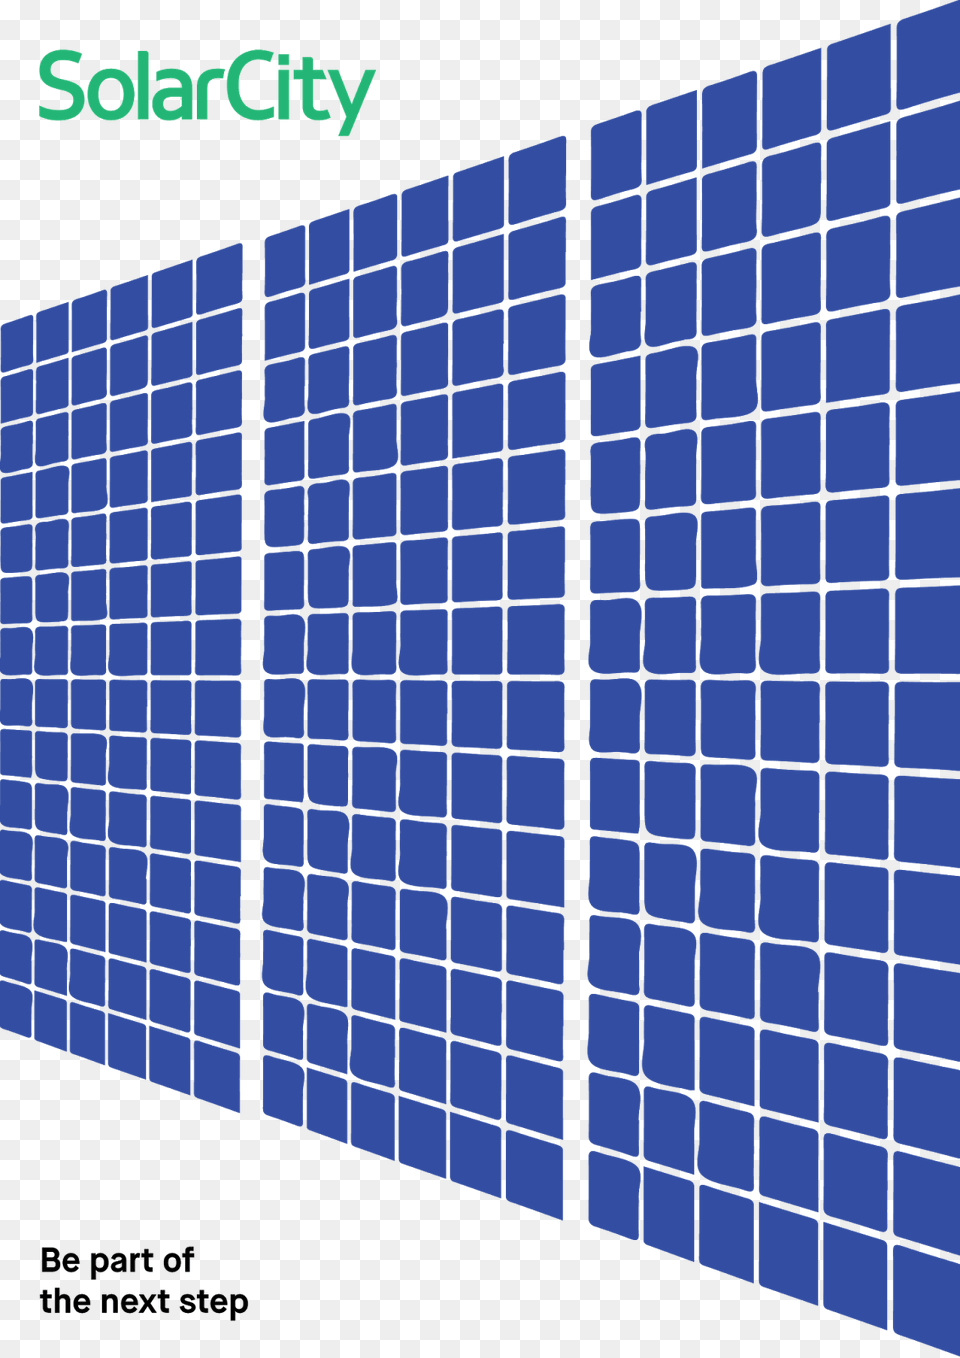 Solarcity Poster Variations Wrigley Field, Gate, Electrical Device, Solar Panels Png Image